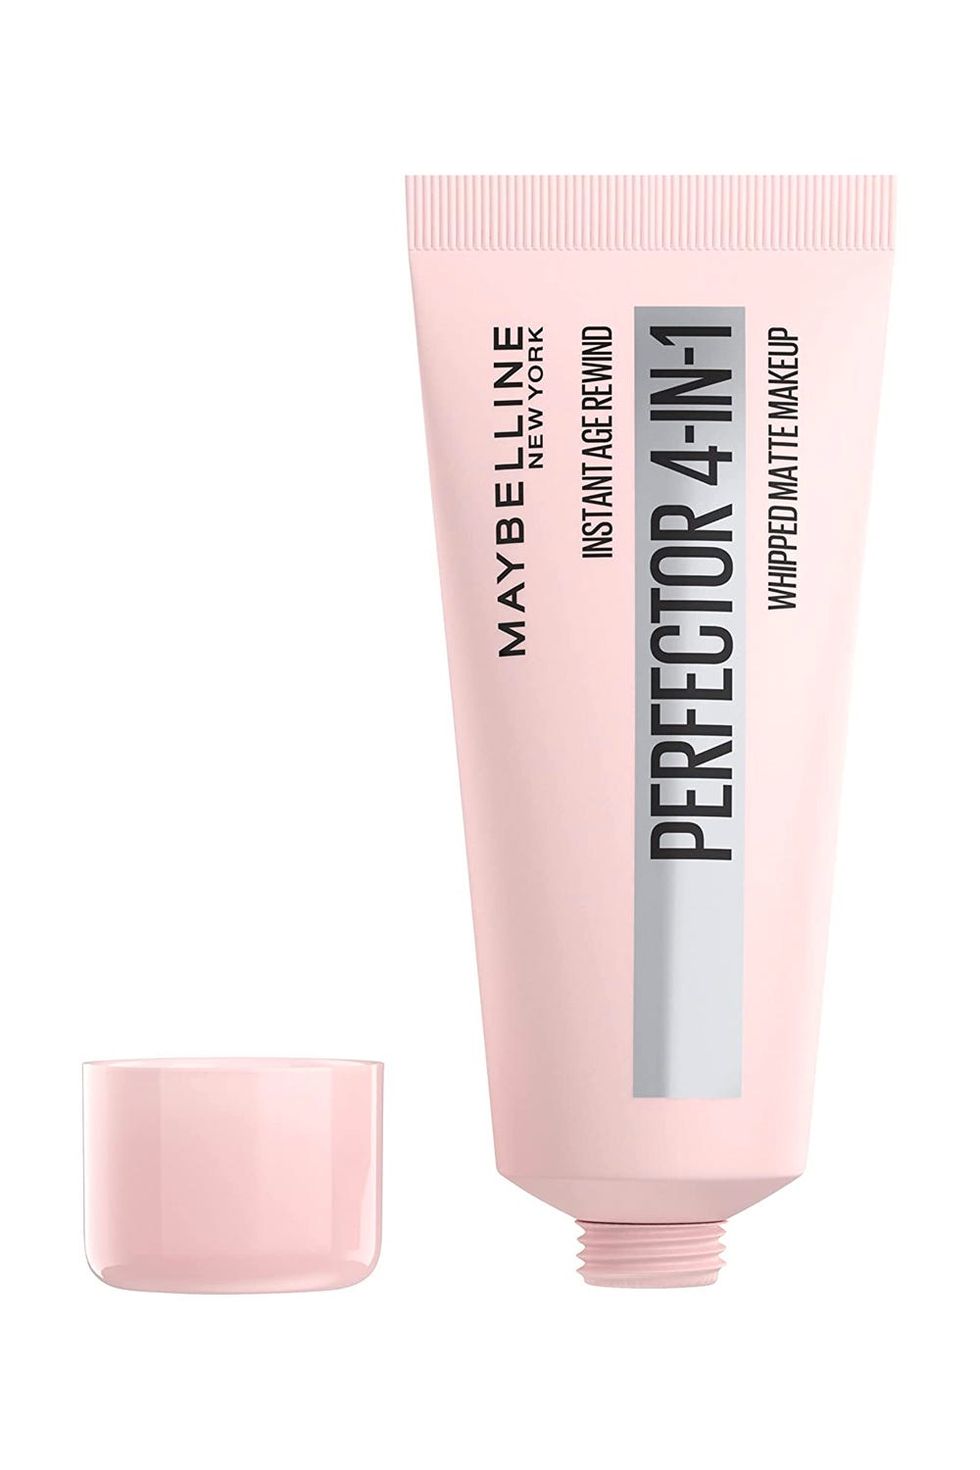 Maybelline New York Instant Age Rewind Instant Perfector 4-In-1 Matte Makeup, 05 Deep, 1 Ounce